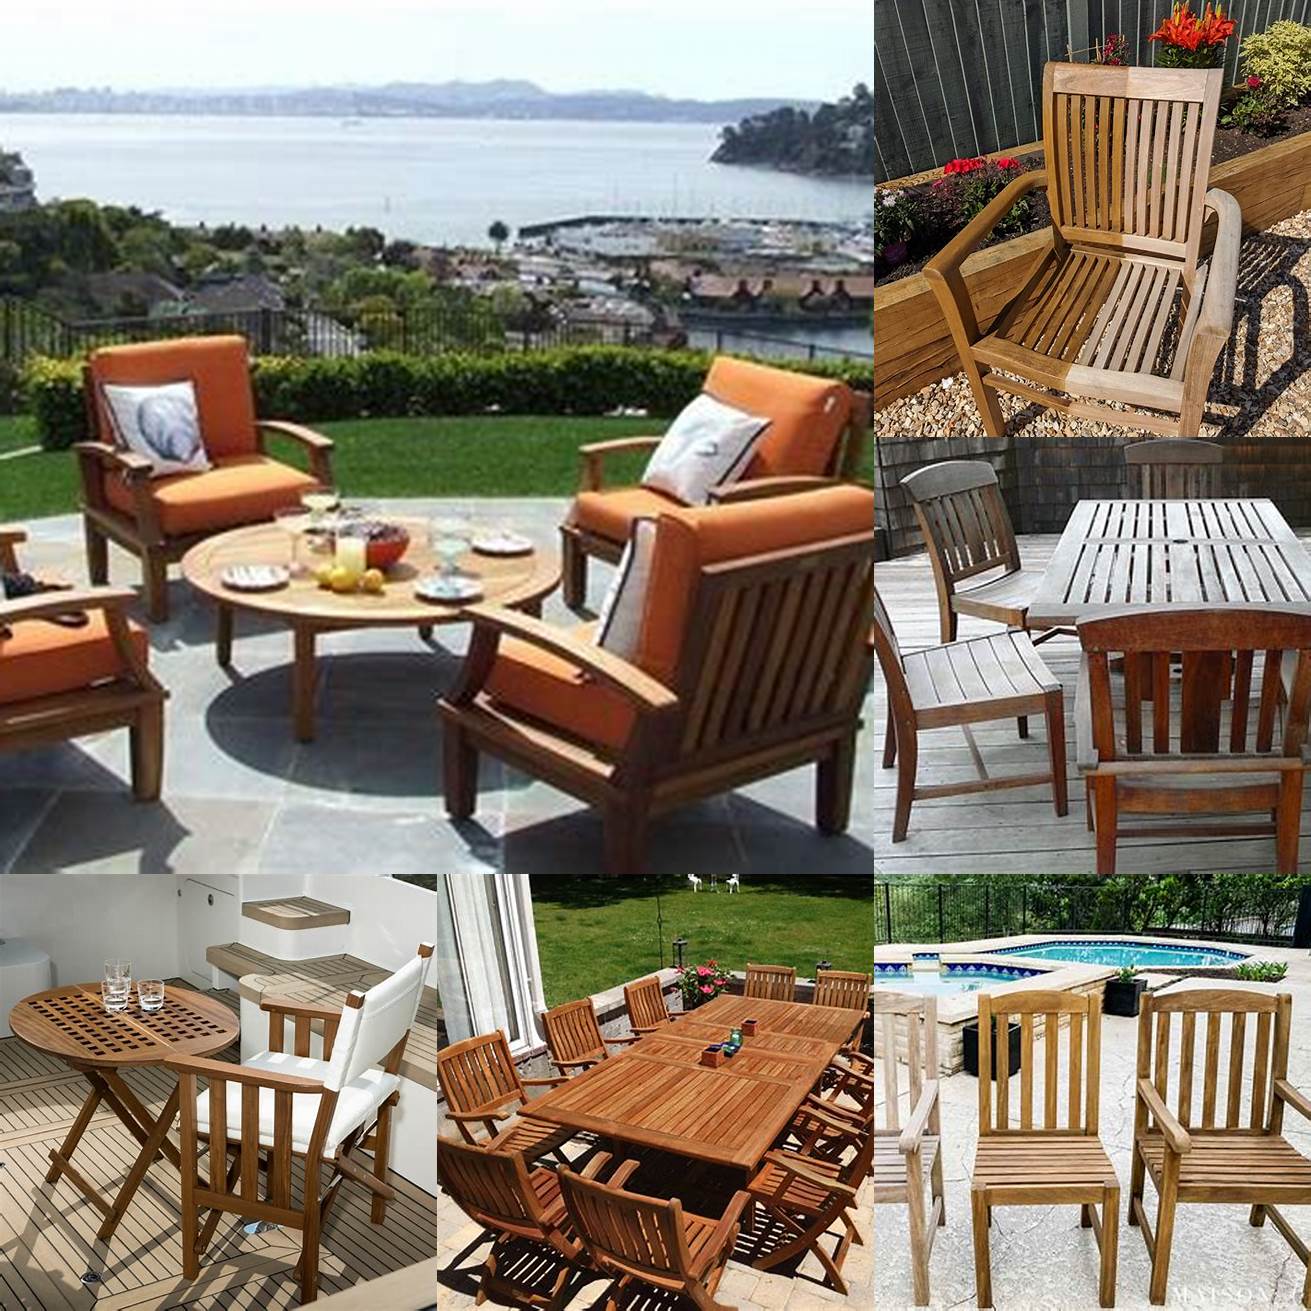 Protecting teak furniture from the elements